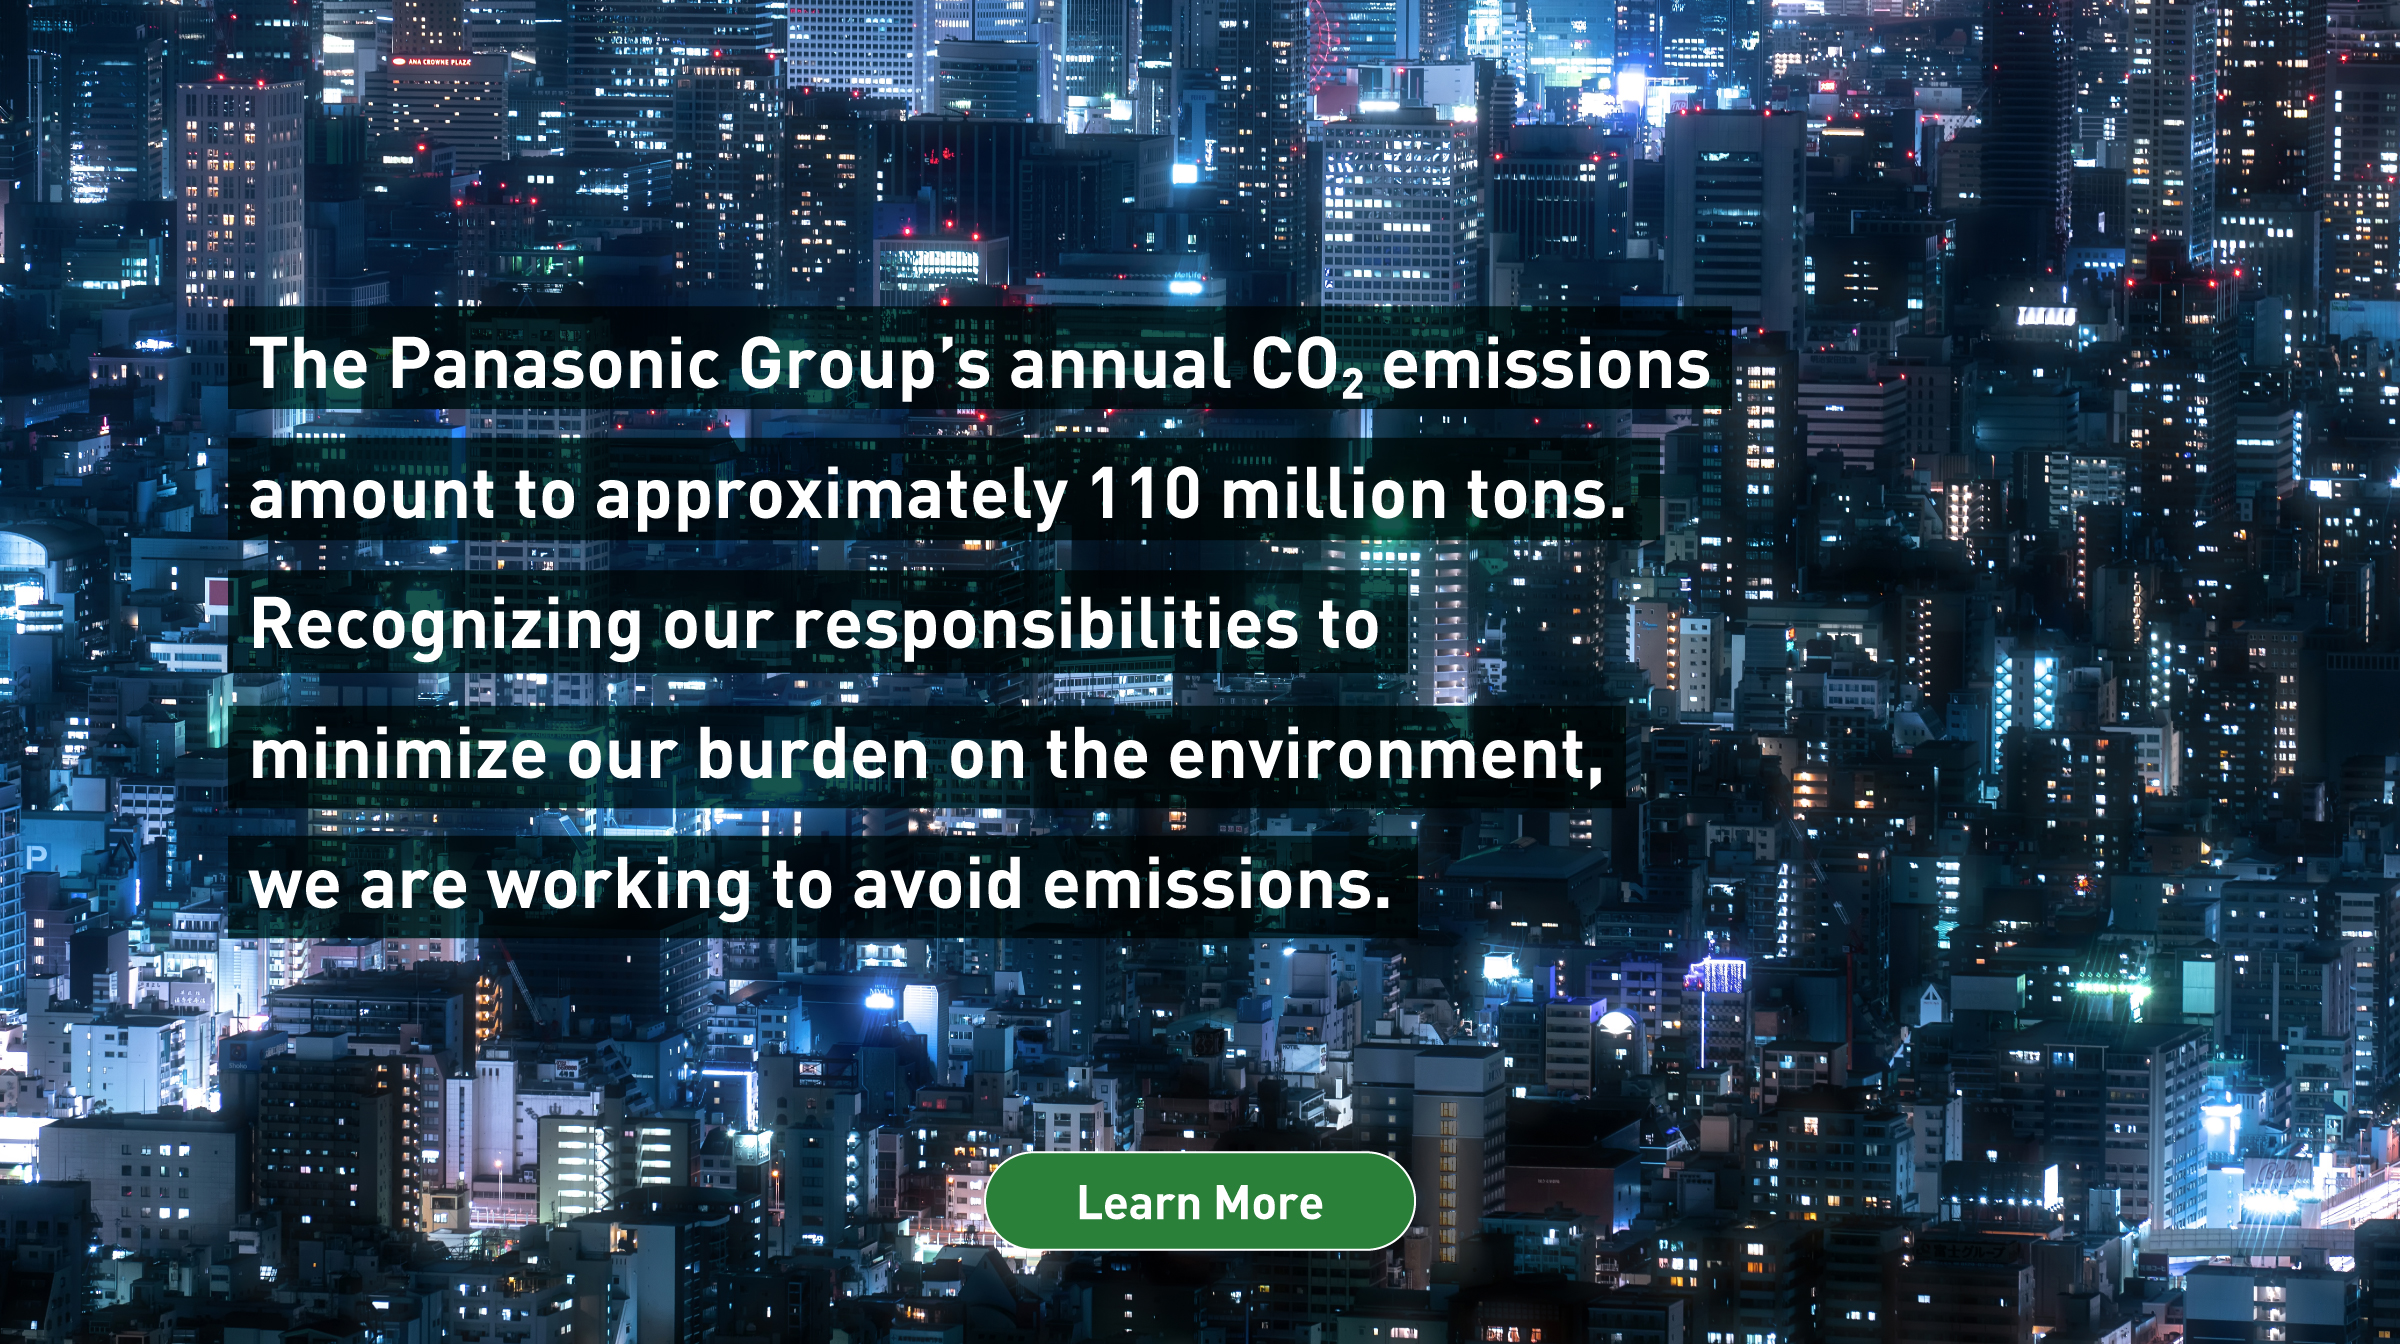 The Panasonic Group’s annual CO2 emissions amount to approximately 110 million tons. Recognizing our responsibilities to minimize our burden on the environment, we are working to avoid emissions. Background photo: Aerial view of indoor lights leaking from tall urban buildings at night. Learn more.